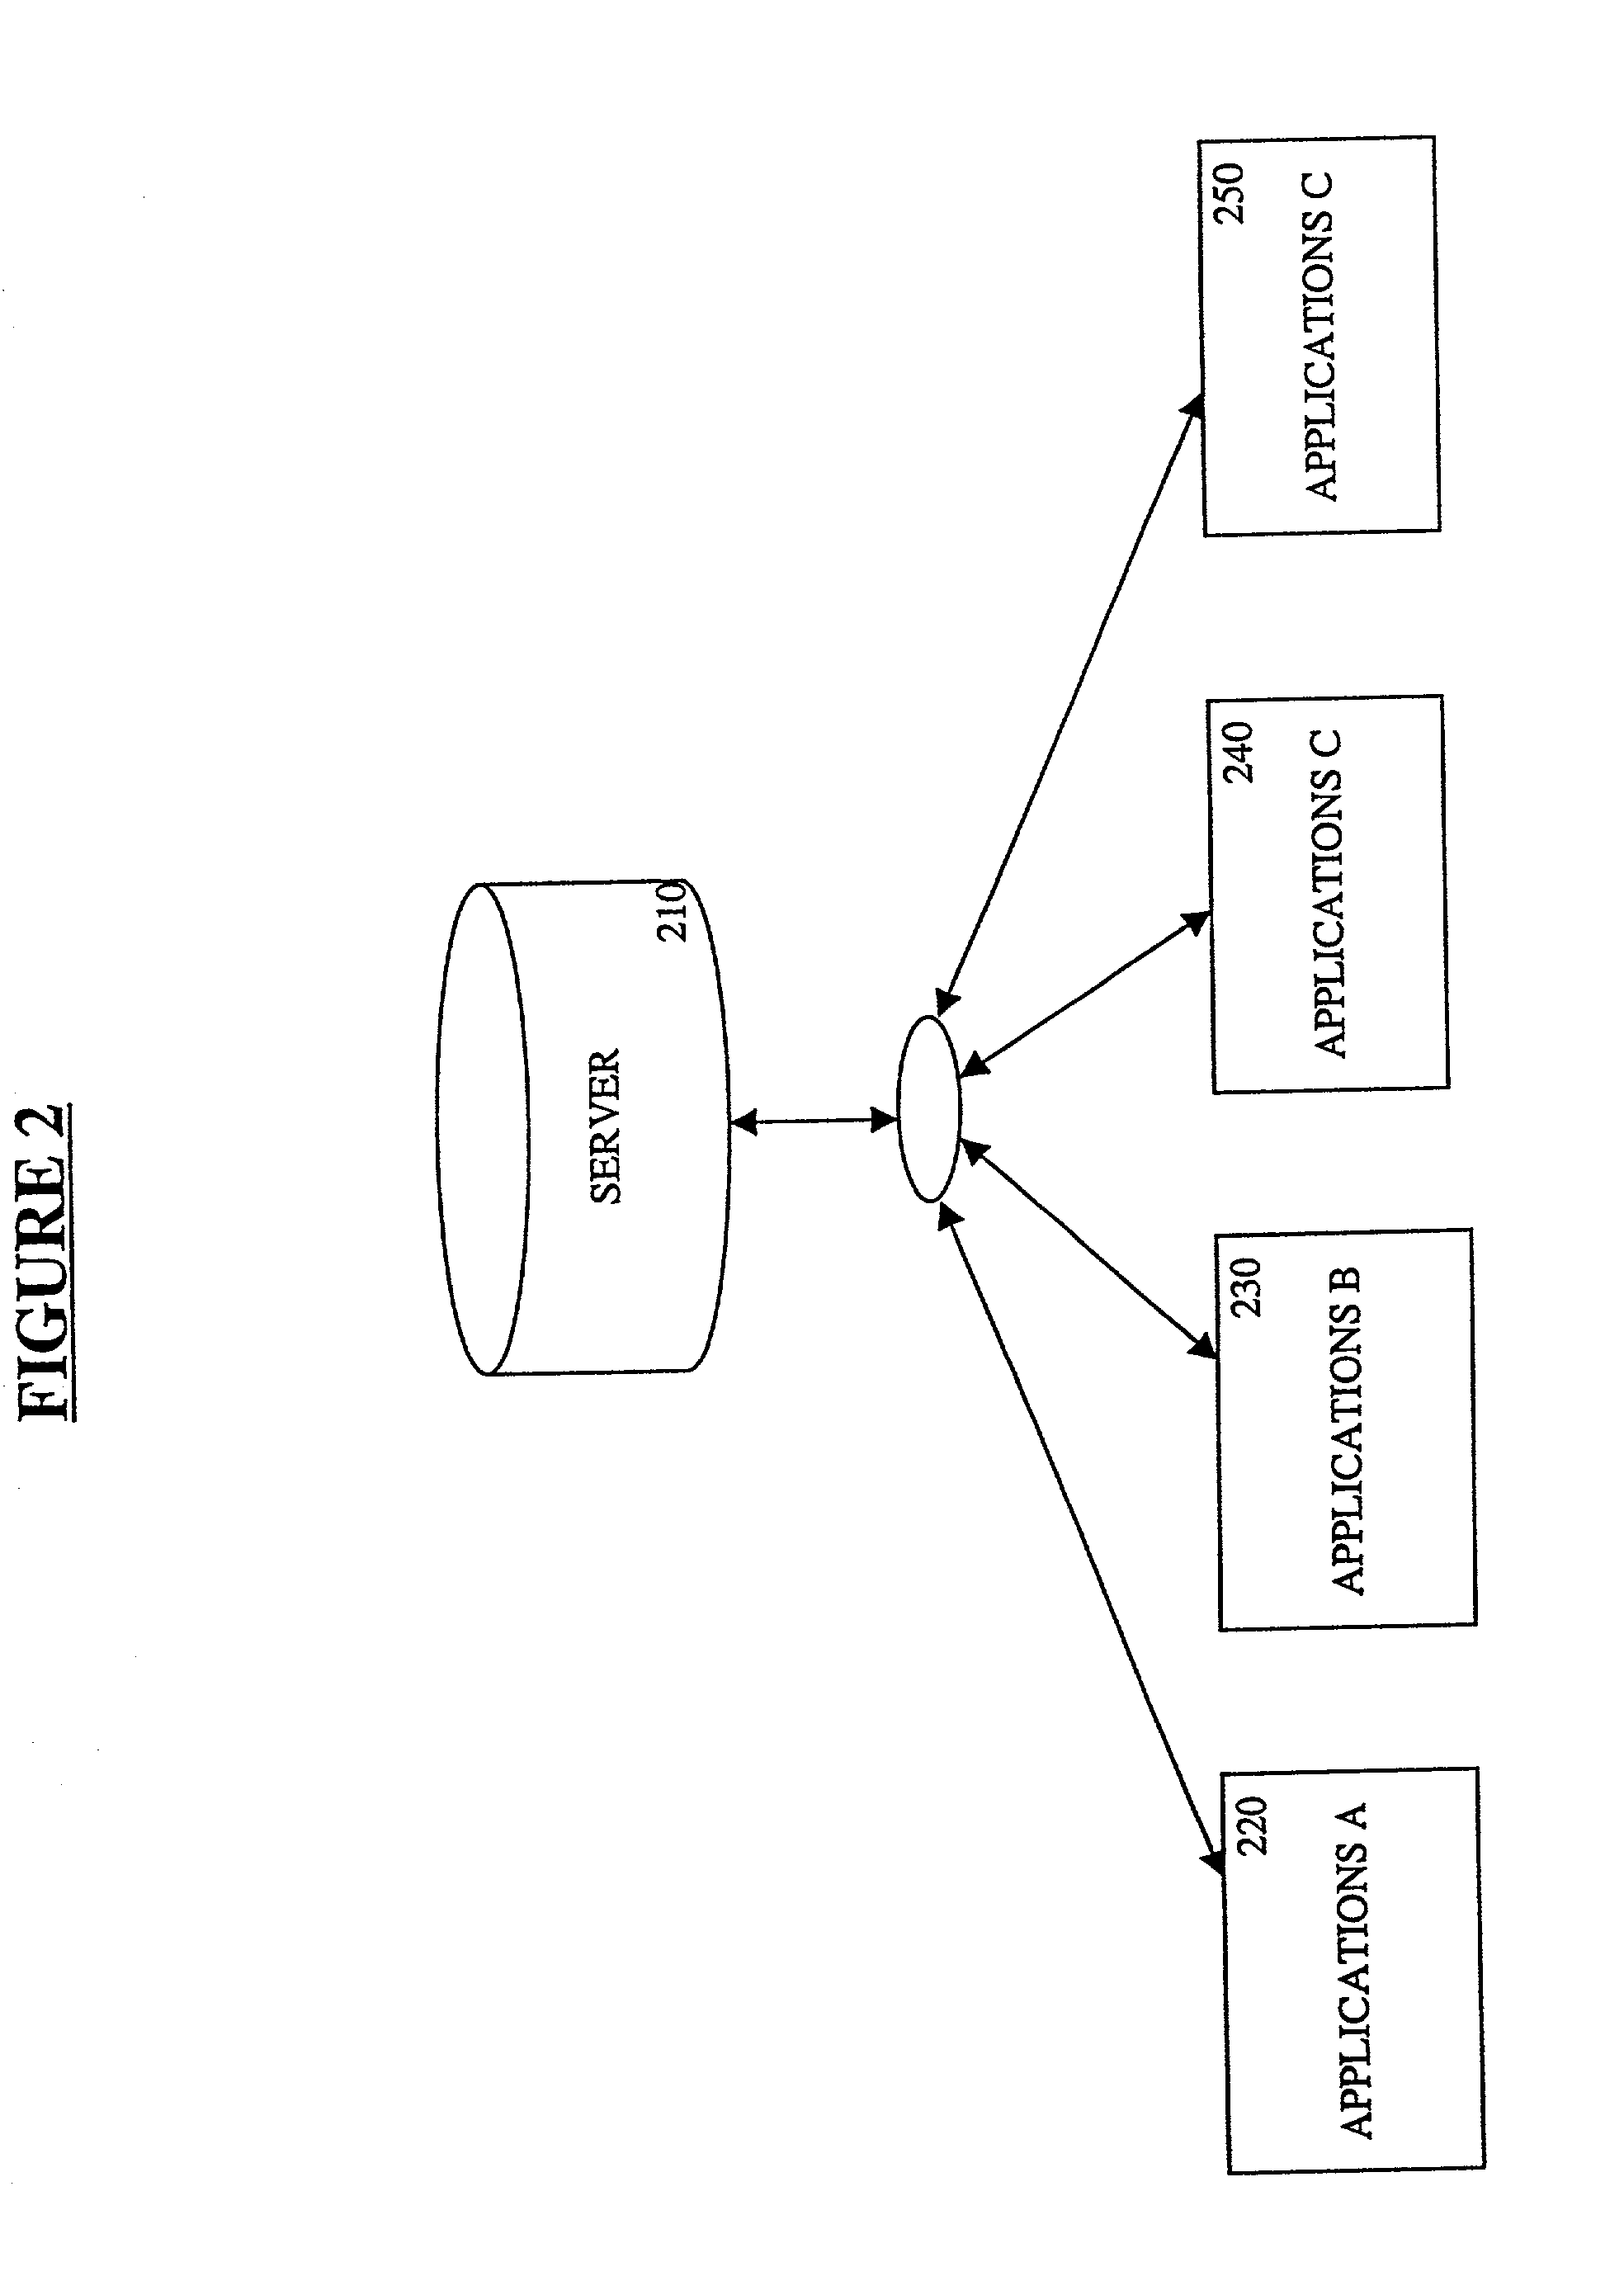 Uniform resource locator access management and control system and method